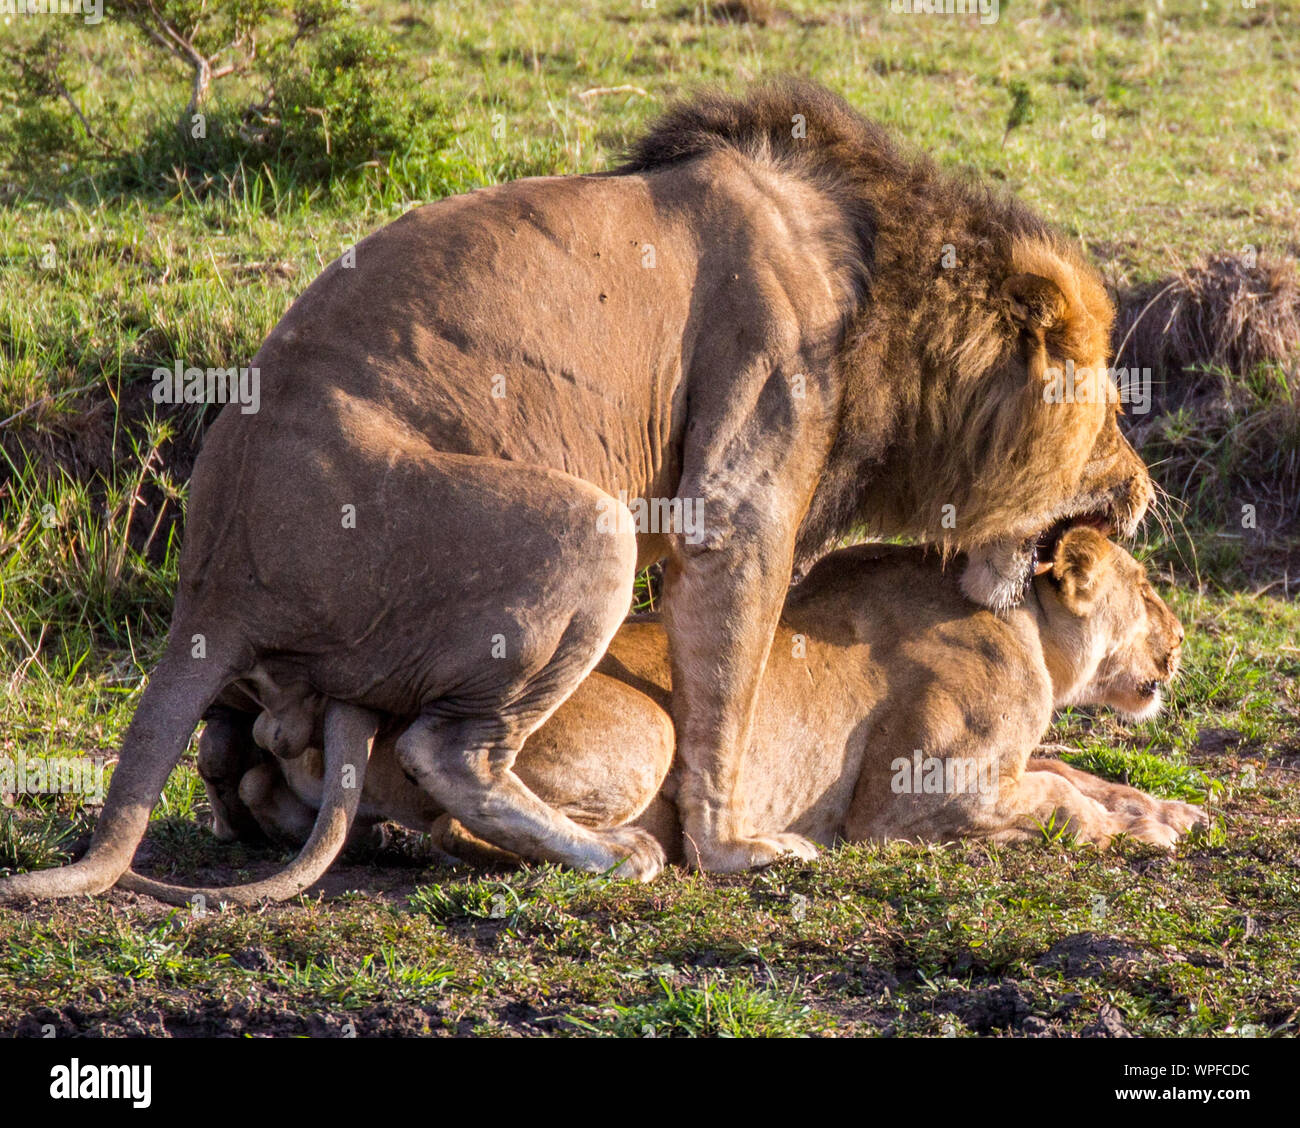 Lion And Lioness Mating On Field Stock Photo - Alamy